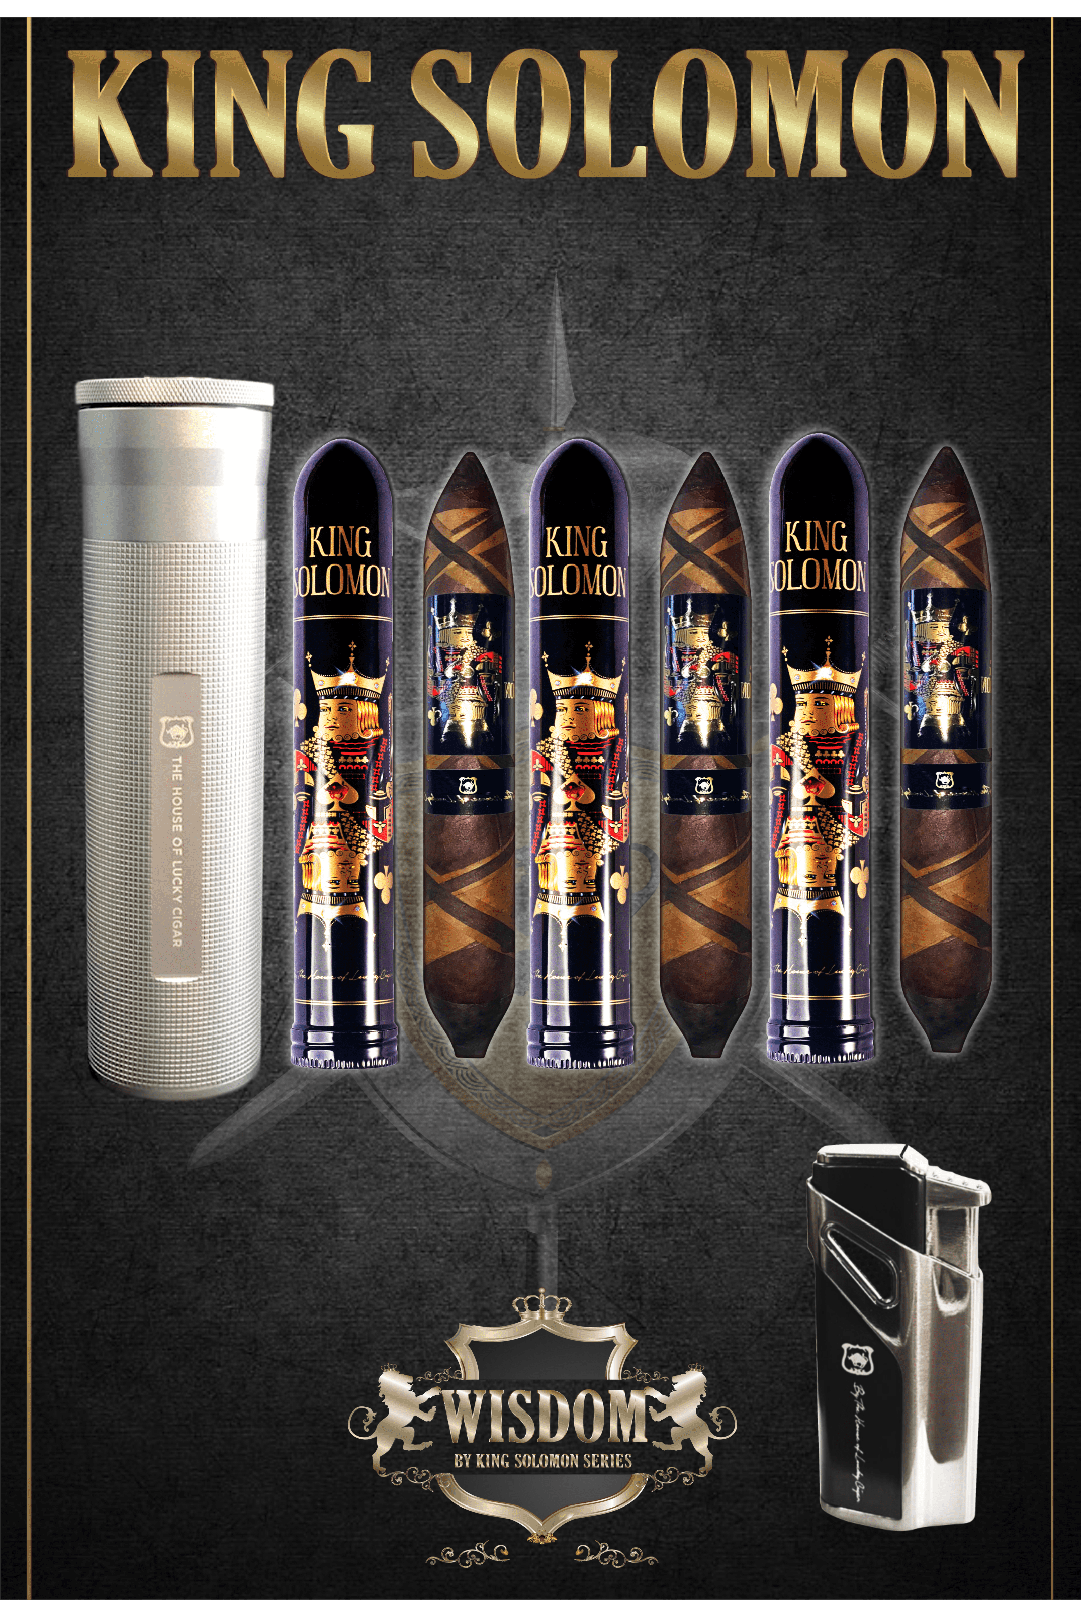 From The King Solomon Series: 3 Solomon 7x60 Cigars with Torch and Travel Humidor Set